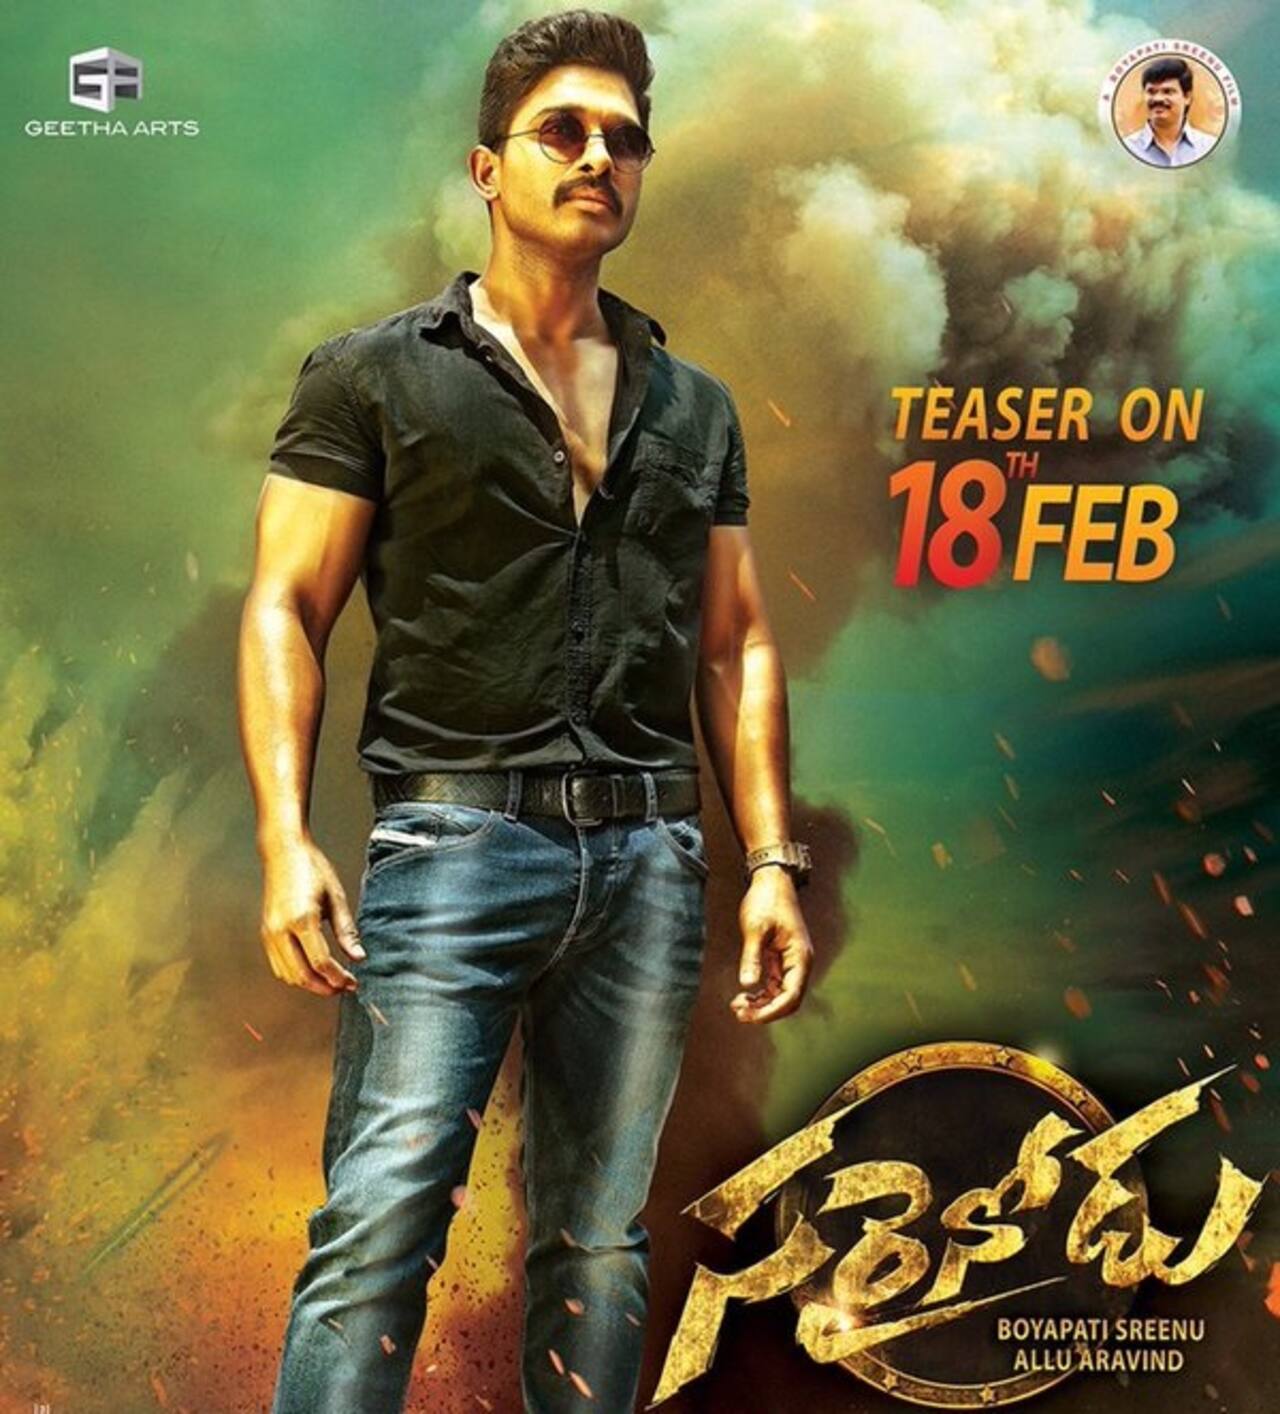 The LEAKED story of Allu Arjun's Sarrainodu is going viral on the internet!  - Bollywood News & Gossip, Movie Reviews, Trailers & Videos at  